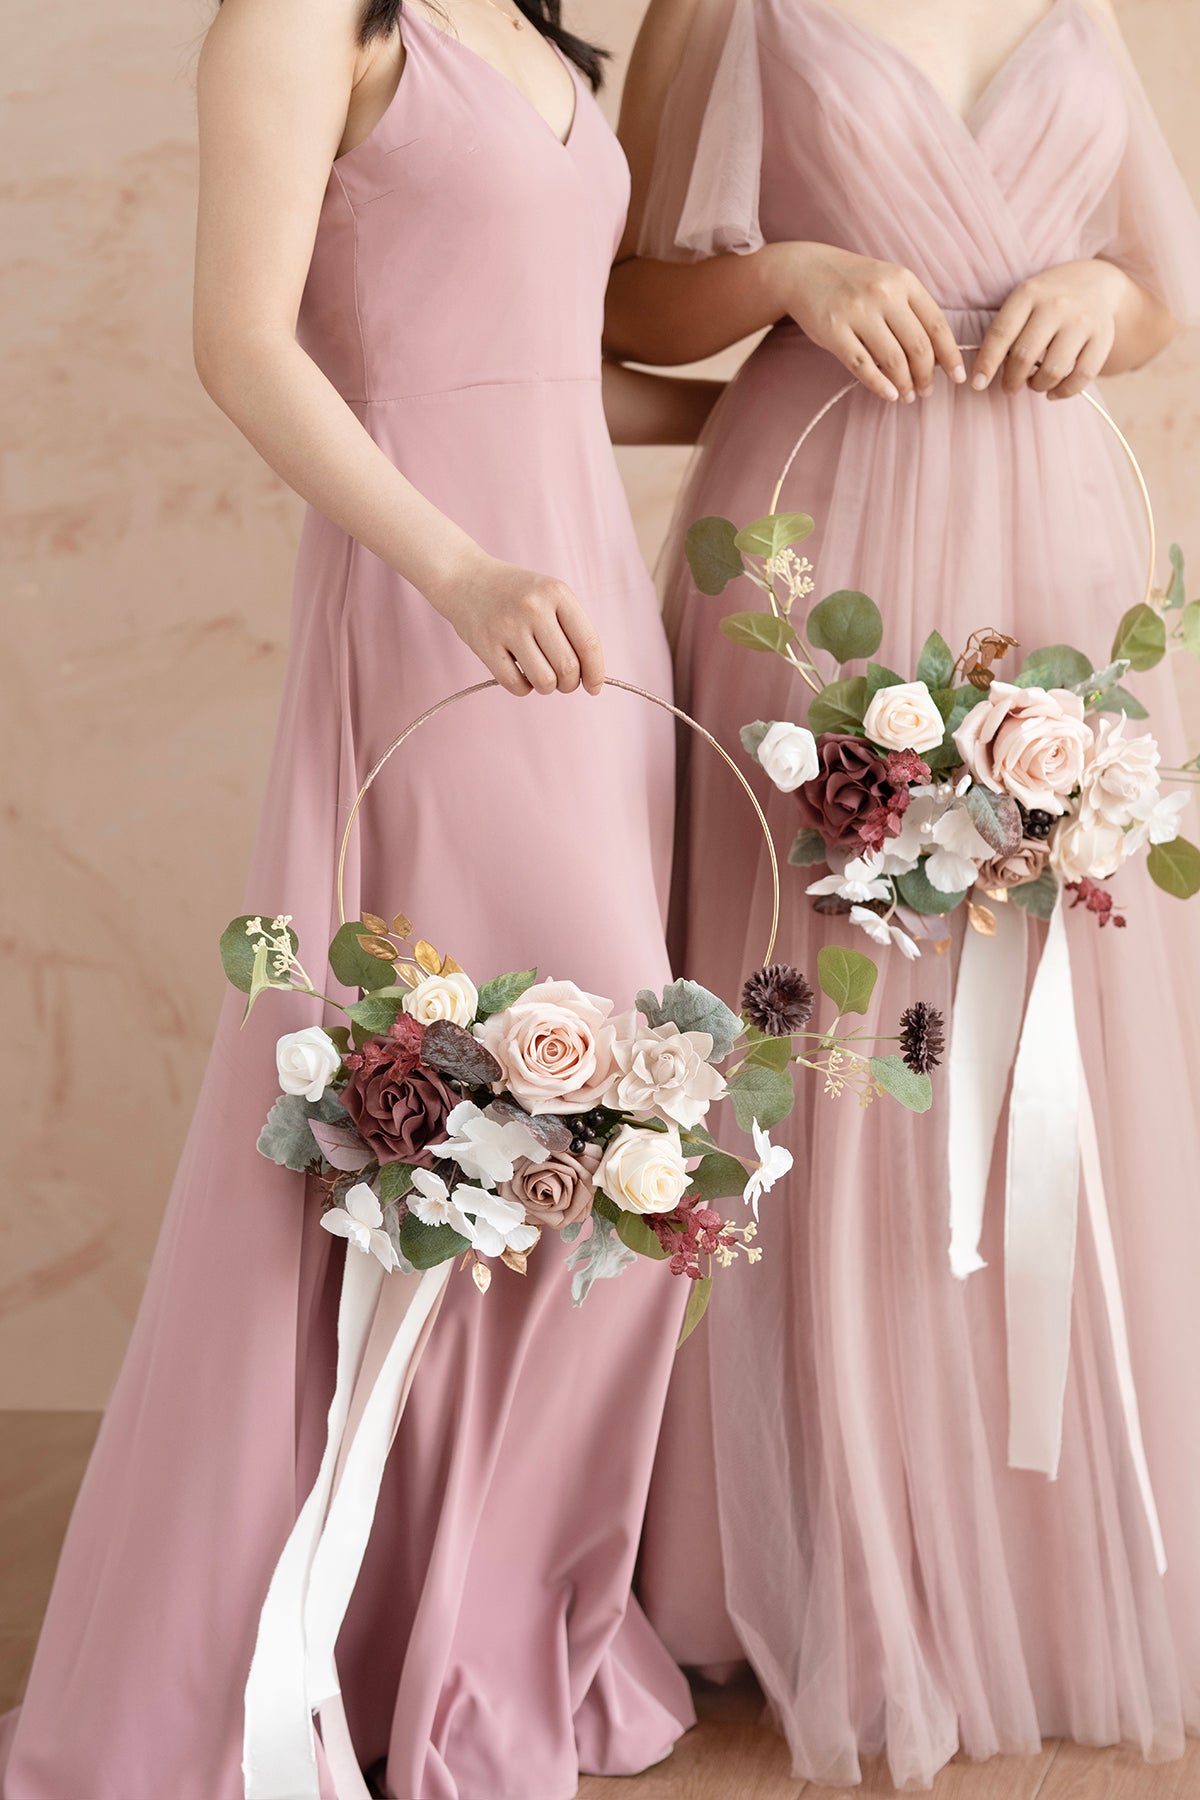 Hoop Bridesmaid Bouquets in Dusty Rose & Mauve